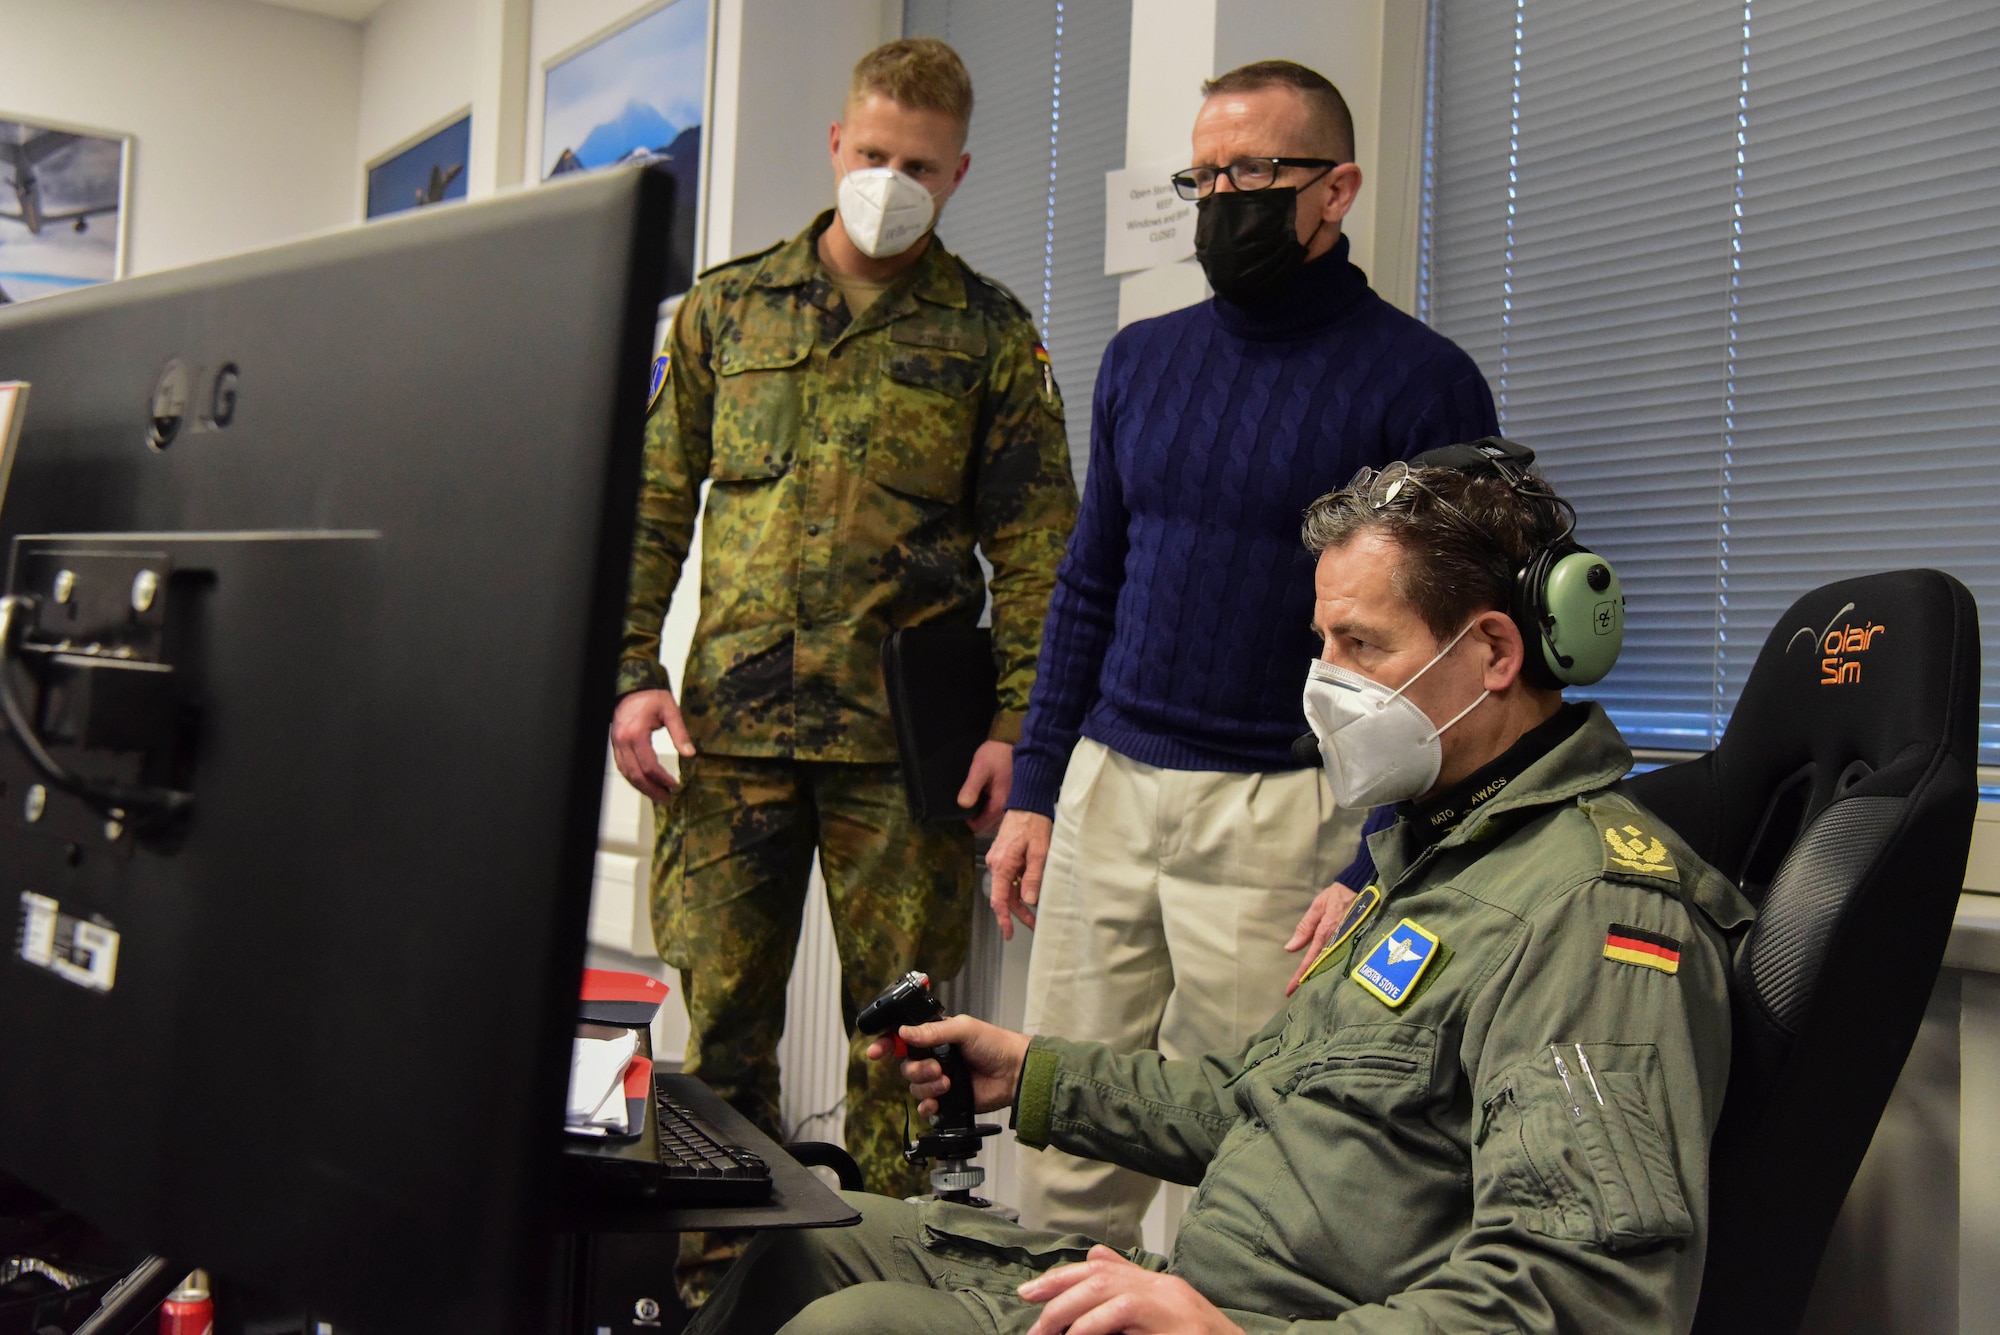 German Maj. Gen. Karsten Stoye, chief of staff at NATO’s Headquarters Allied Air Command, tests the flight simulator during the Spartan Warrior 21-1 exercise at Einsiedlerhof Air Station, Germany, Jan. 25-28, 2021.